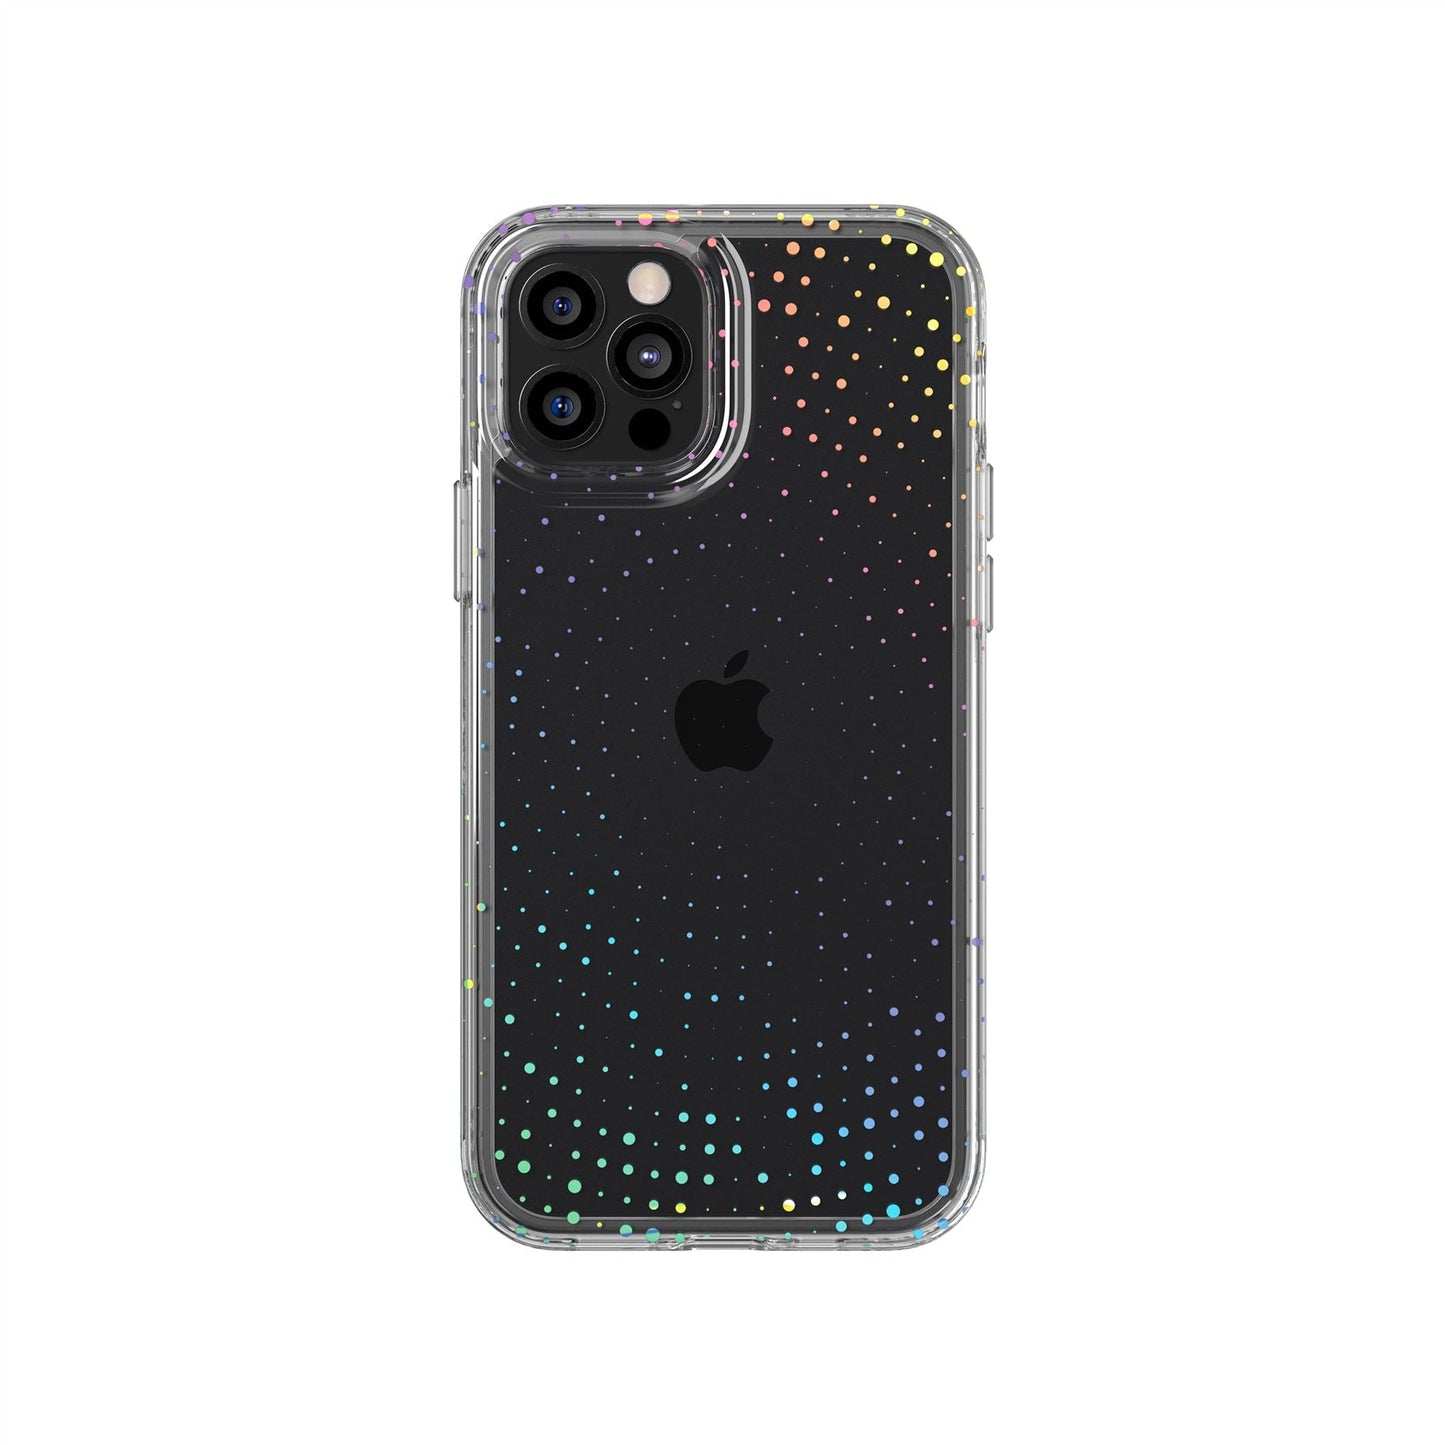 Evo Sparkle Holographic Effect Case for iPhone 12 Pro